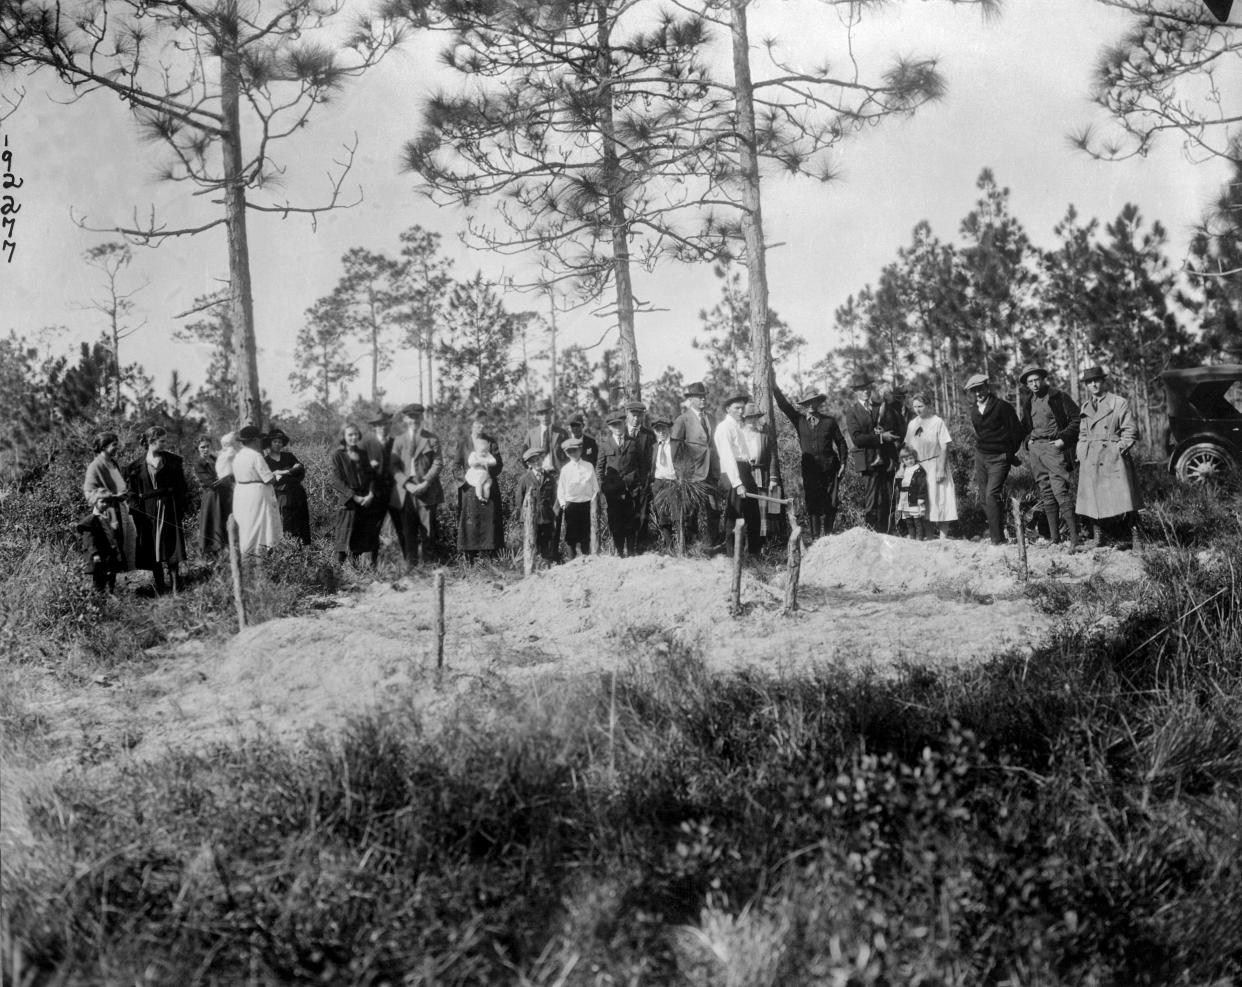 A crowd of white citizens of Sumner, Fla., near a site where six Black residents of Rosewood, Fla., were killed and buried.